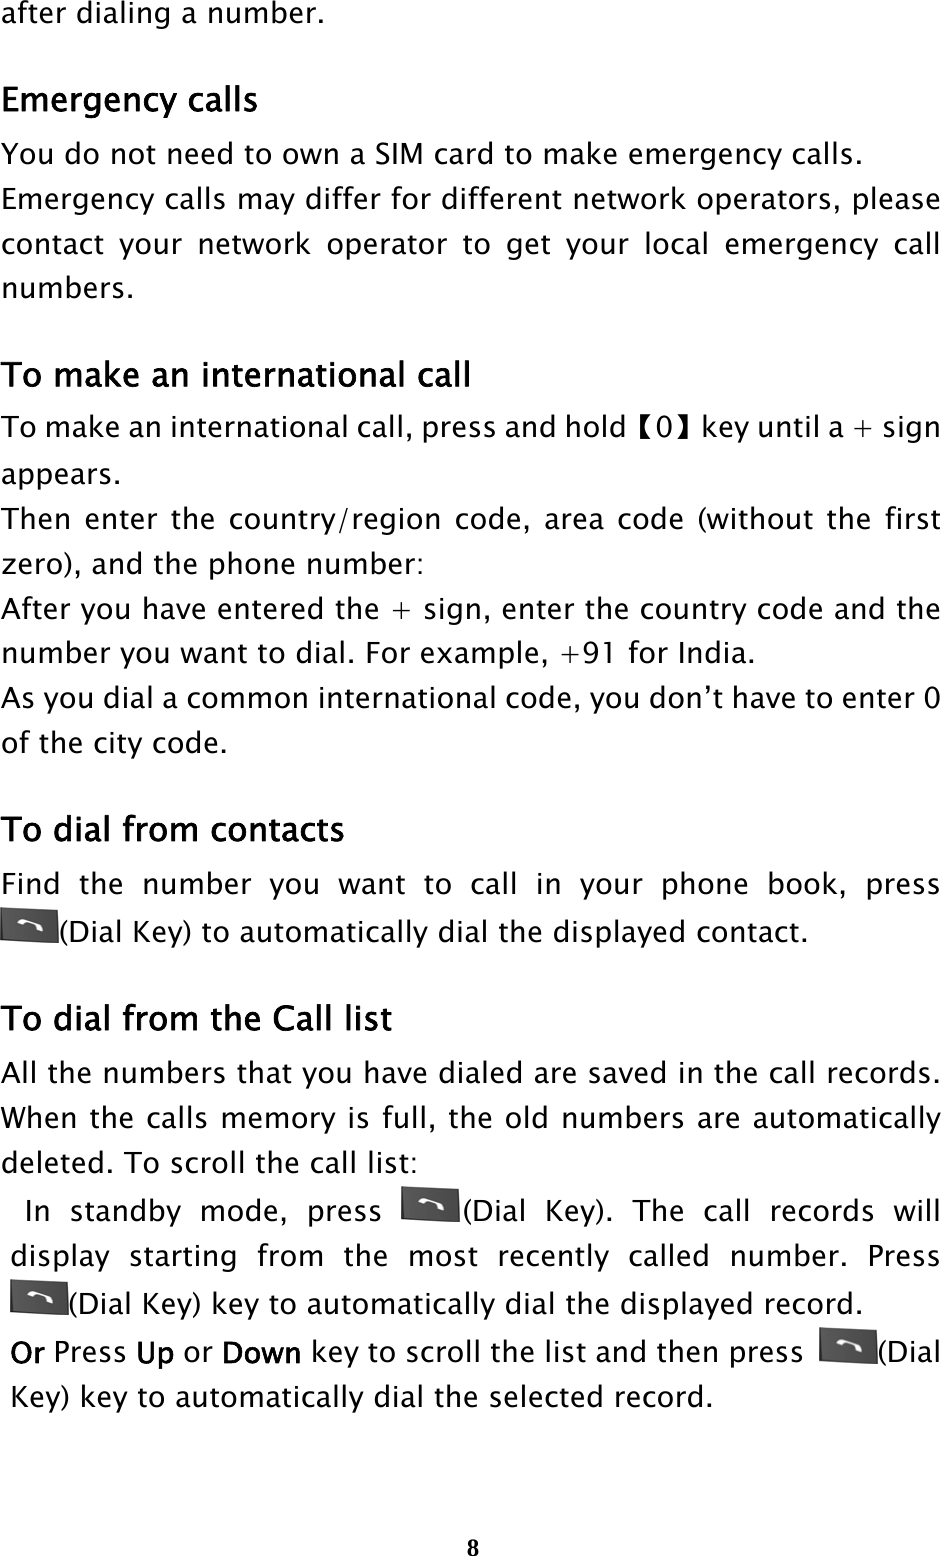  8after dialing a number.  Emergency calls You do not need to own a SIM card to make emergency calls. Emergency calls may differ for different network operators, please contact your network operator to get your local emergency call numbers.  To make an international call To make an international call, press and hold【0】key until a + sign appears. Then enter the country/region code, area code (without the first zero), and the phone number: After you have entered the + sign, enter the country code and the number you want to dial. For example, +91 for India. As you dial a common international code, you don’t have to enter 0 of the city code.  To dial from contacts Find the number you want to call in your phone book, press (Dial Key) to automatically dial the displayed contact.  To dial from the Call list All the numbers that you have dialed are saved in the call records. When the calls memory is full, the old numbers are automatically deleted. To scroll the call list:  In standby mode, press  (Dial Key). The call records will display starting from the most recently called number. Press (Dial Key) key to automatically dial the displayed record. Or Press Up or Down key to scroll the list and then press  (Dial Key) key to automatically dial the selected record.  